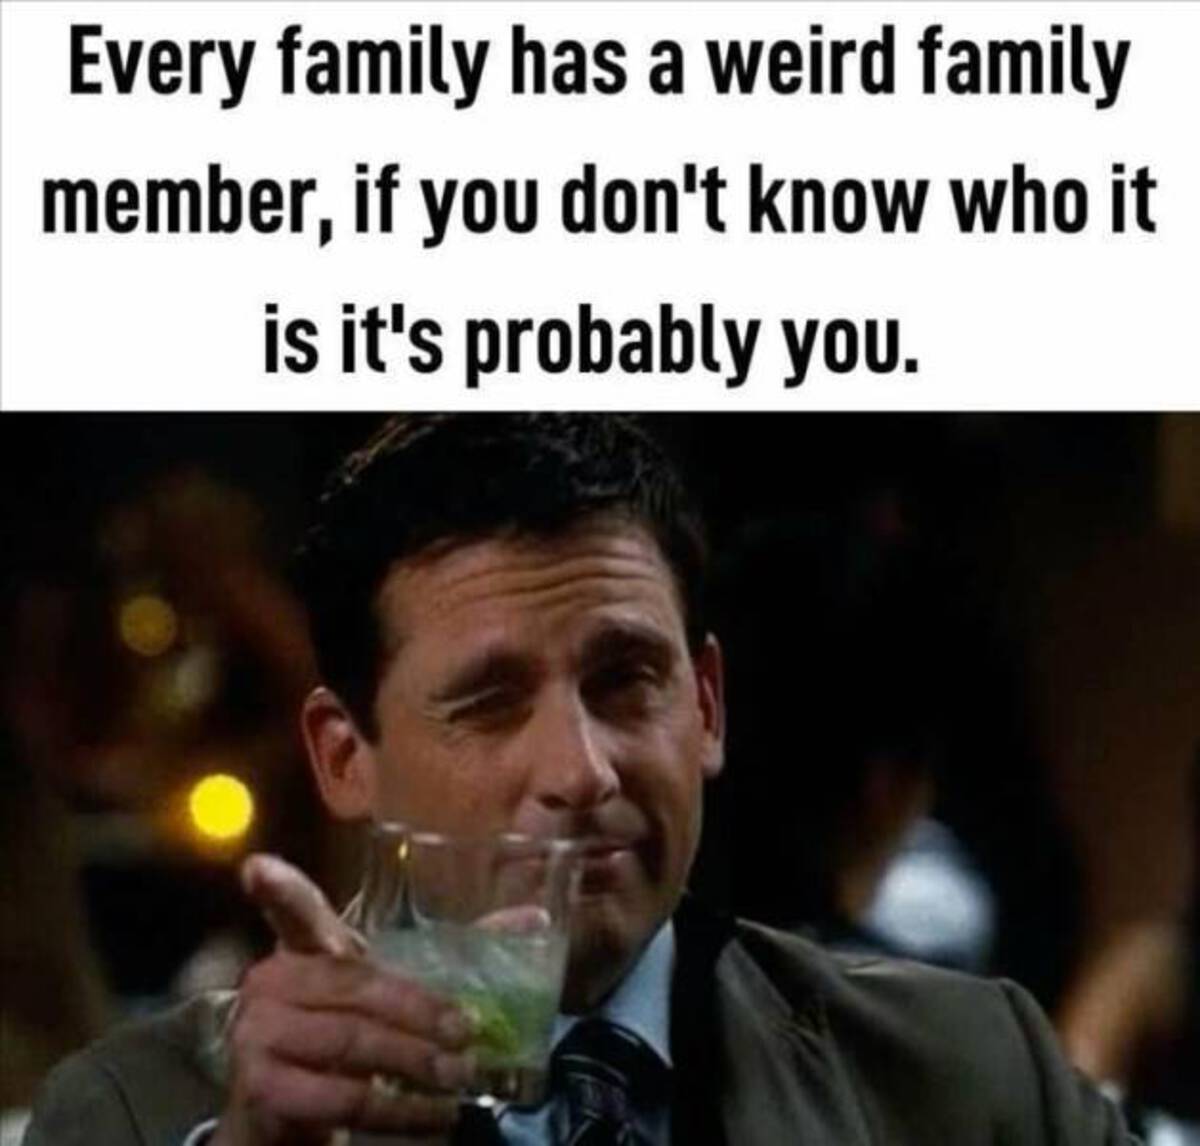 Every family has a weird family member, if you don't know who it is it's probably you.